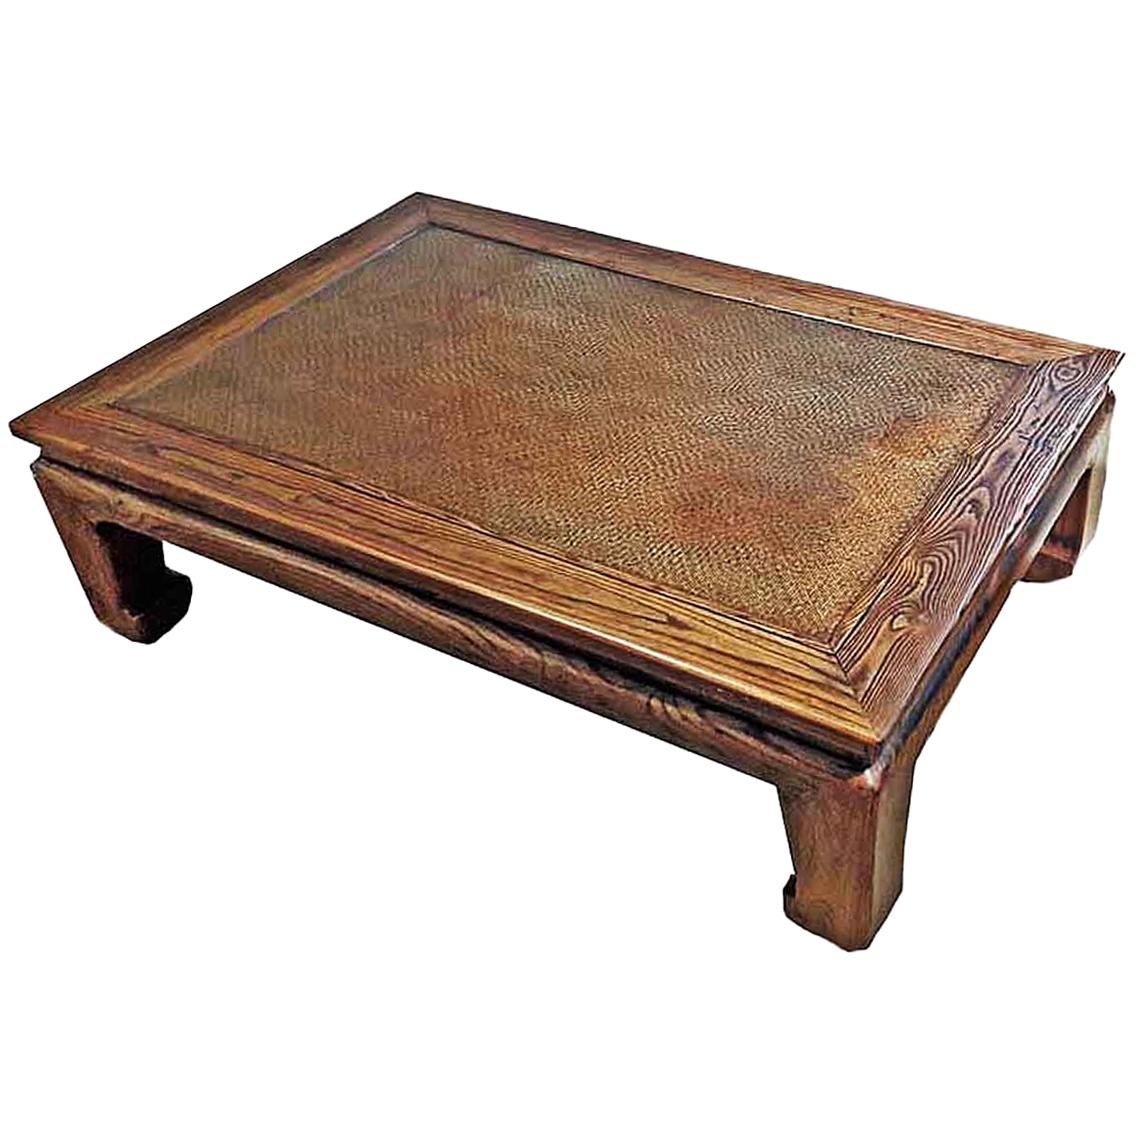 19th Century Elm Wood Coffee Table from China